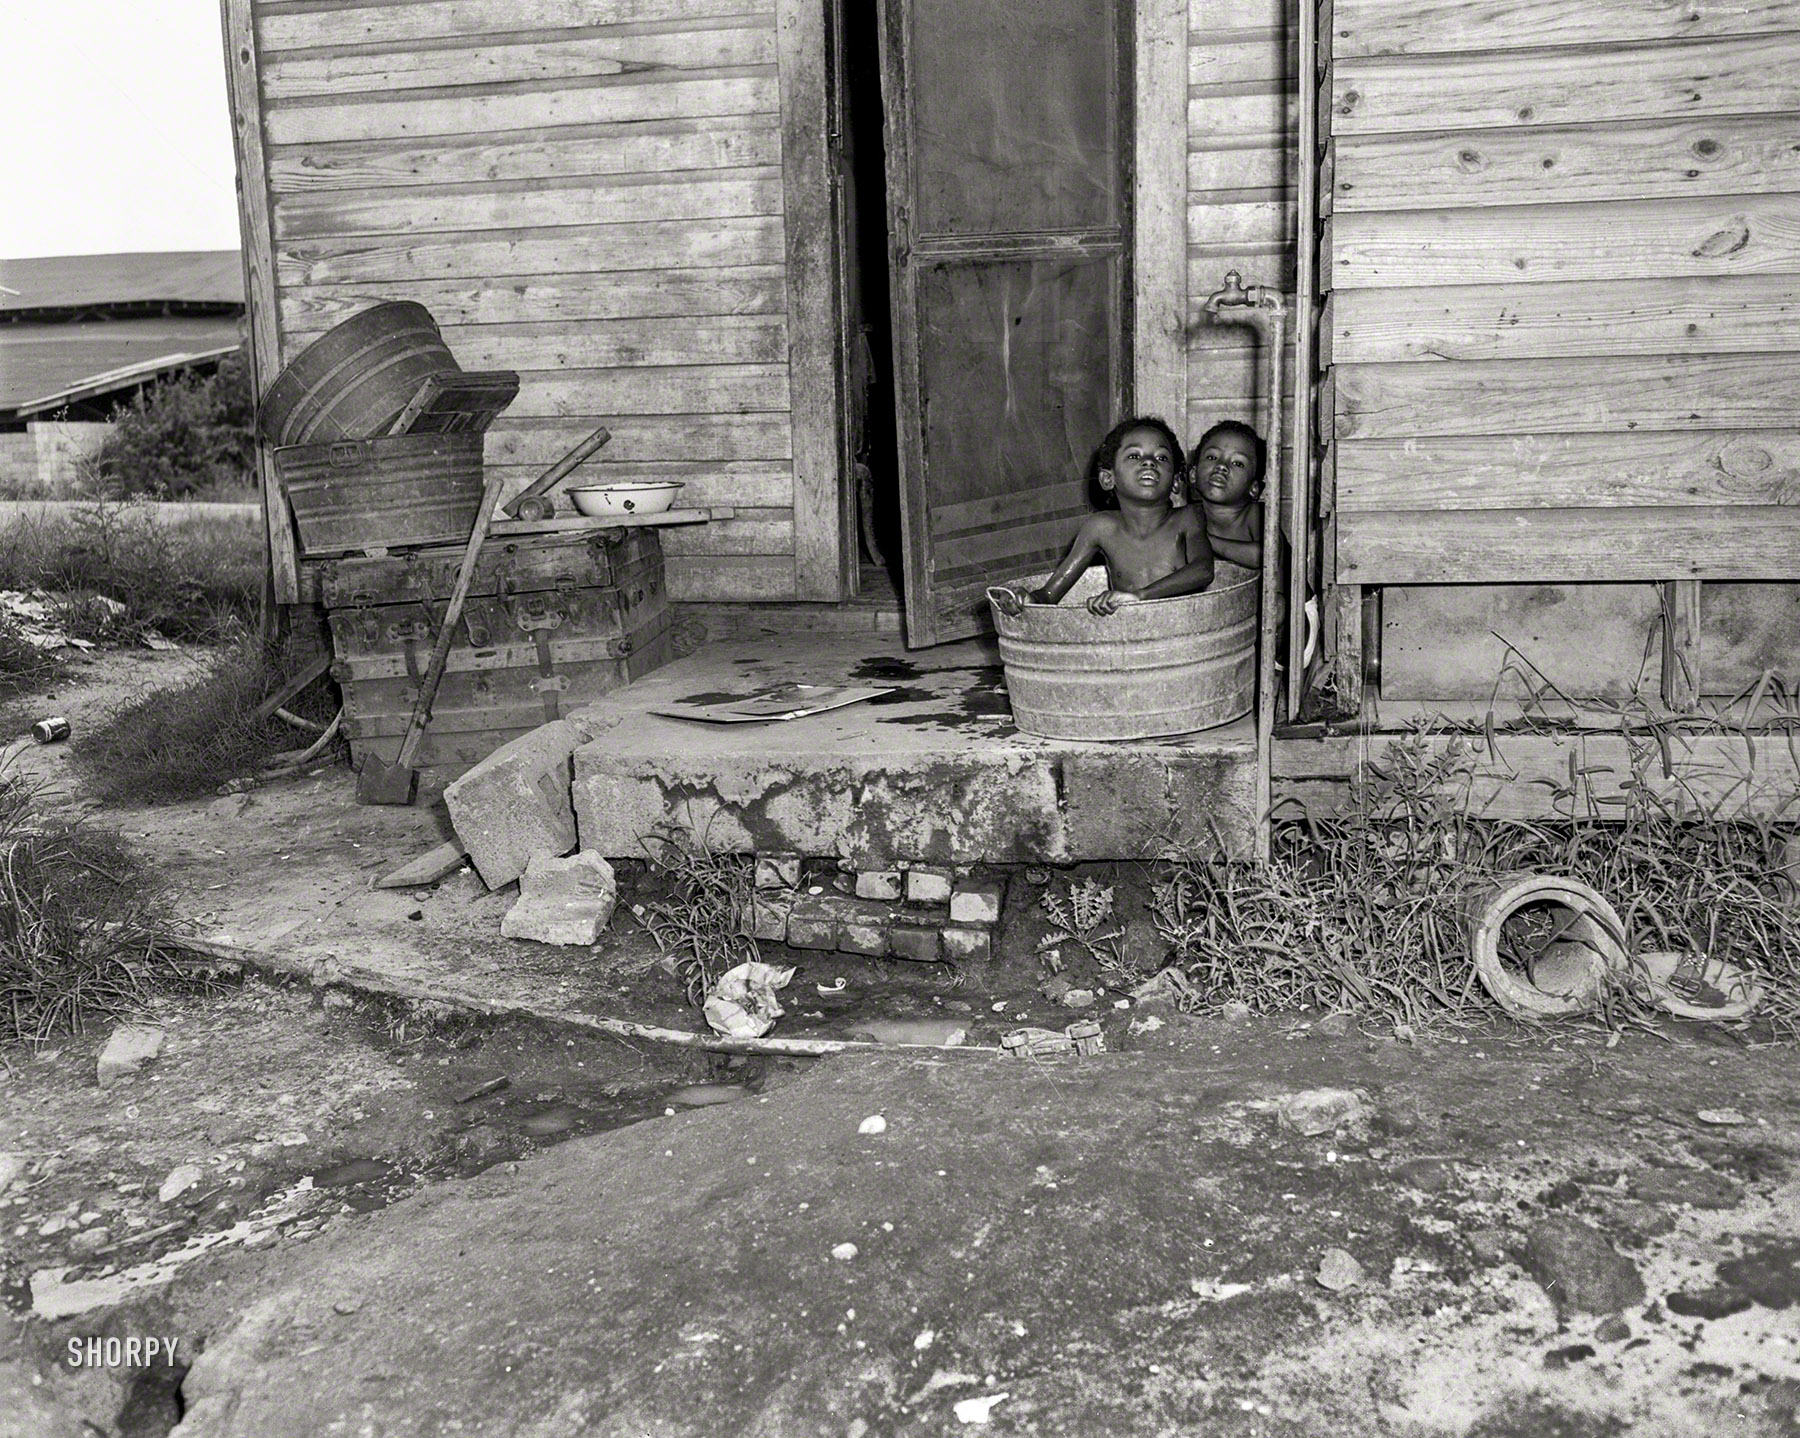 Columbus, Georgia, circa 1950, and another still from the "housing" series, showing the opposite of an en suite bath. 4x5 acetate negative. View full size.